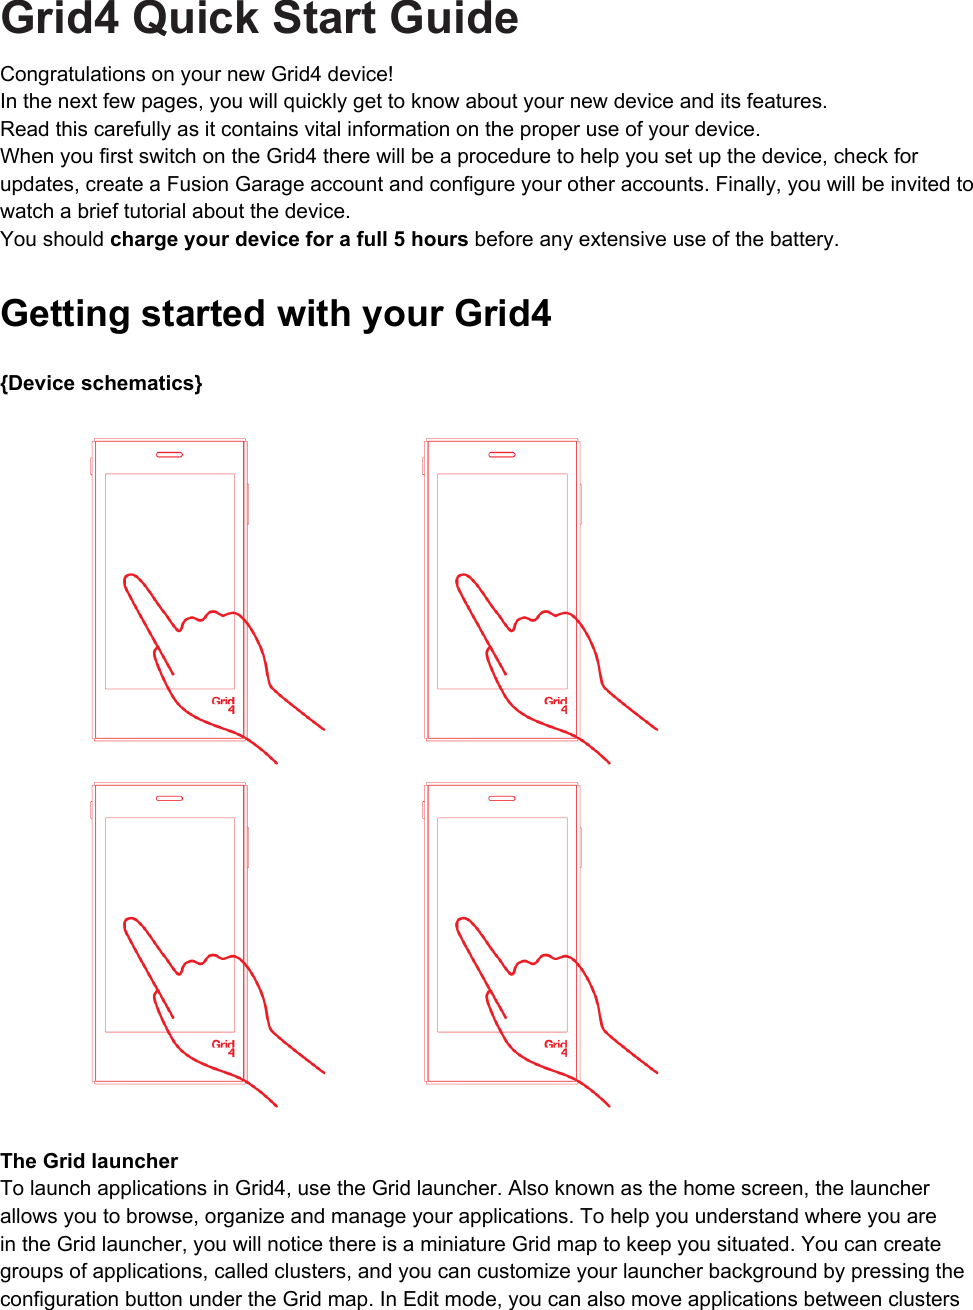 Grid4 Quick Start GuideCongratulations on your new Grid4 device! In the next few pages, you will quickly get to know about your new device and its features. Read this carefully as it contains vital information on the proper use of your device. When you first switch on the Grid4 there will be a procedure to help you set up the device, check for updates, create a Fusion Garage account and configure your other accounts. Finally, you will be invited to watch a brief tutorial about the device.You should charge your device for a full 5 hours before any extensive use of the battery.Getting started with your Grid4 {Device schematics}  The Grid launcher To launch applications in Grid4, use the Grid launcher. Also known as the home screen, the launcher allows you to browse, organize and manage your applications. To help you understand where you are in the Grid launcher, you will notice there is a miniature Grid map to keep you situated. You can create groups of applications, called clusters, and you can customize your launcher background by pressing the configuration button under the Grid map. In Edit mode, you can also move applications between clusters 